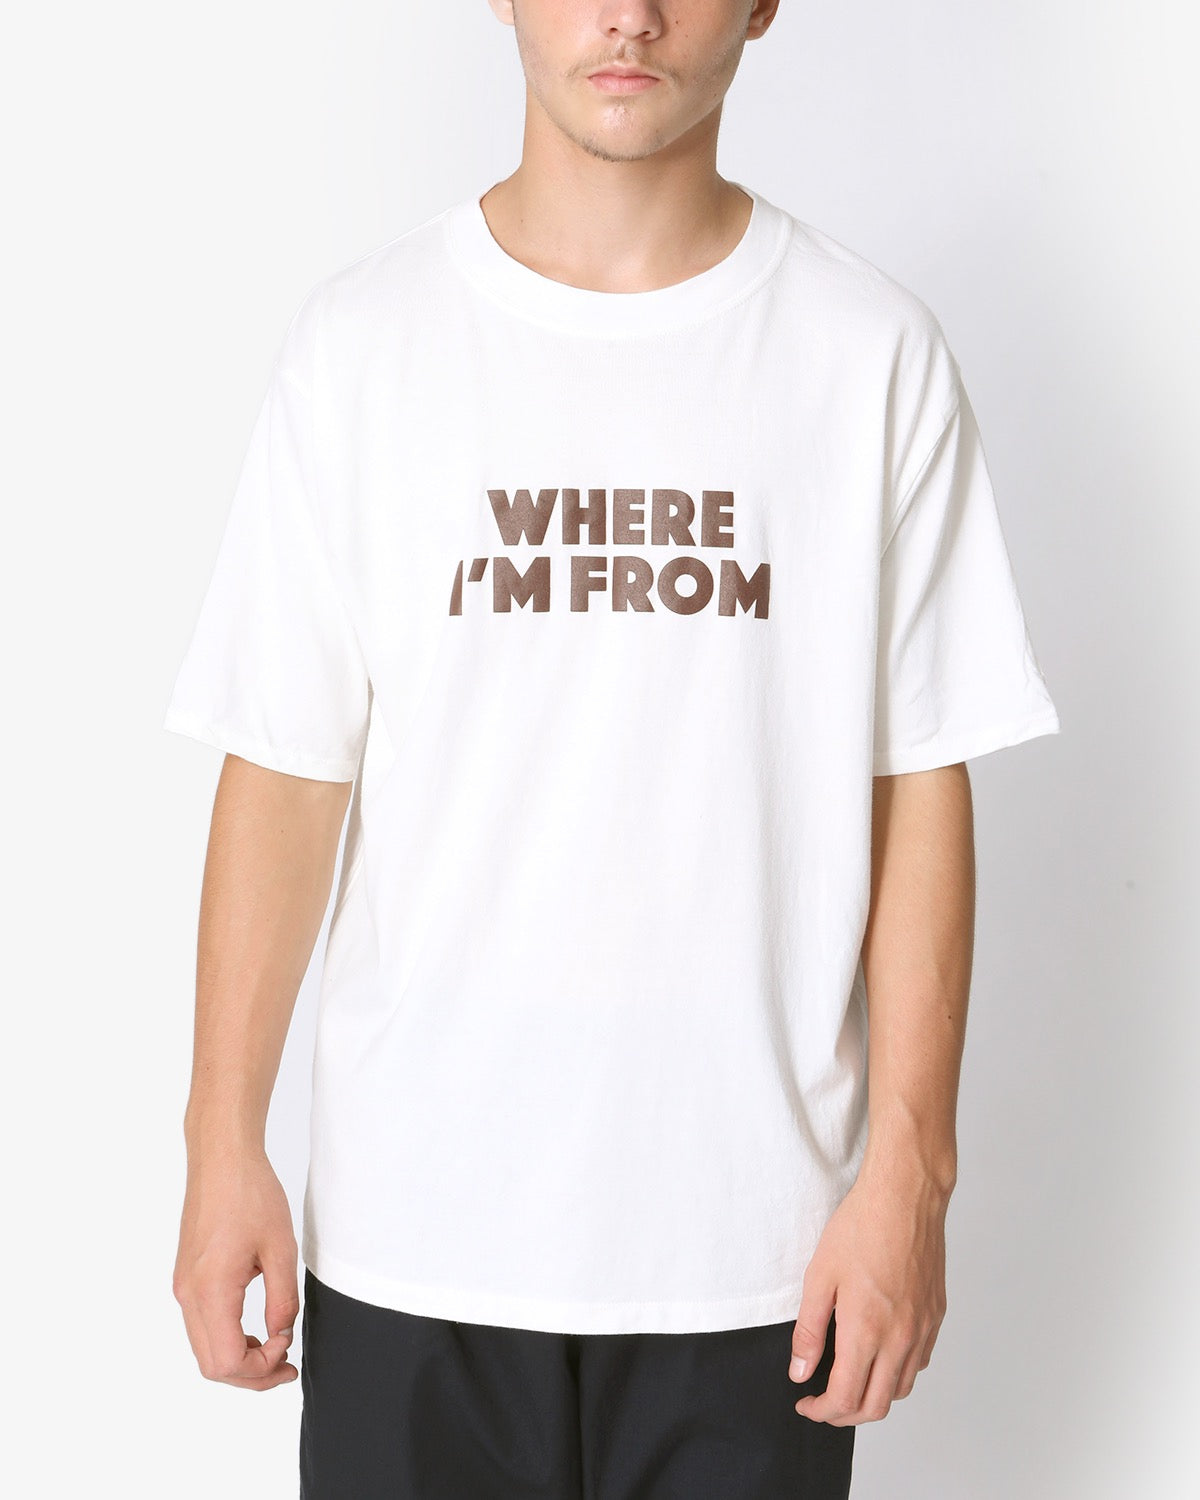 DWELLER S/S TEE "WHERE I'M FROM”